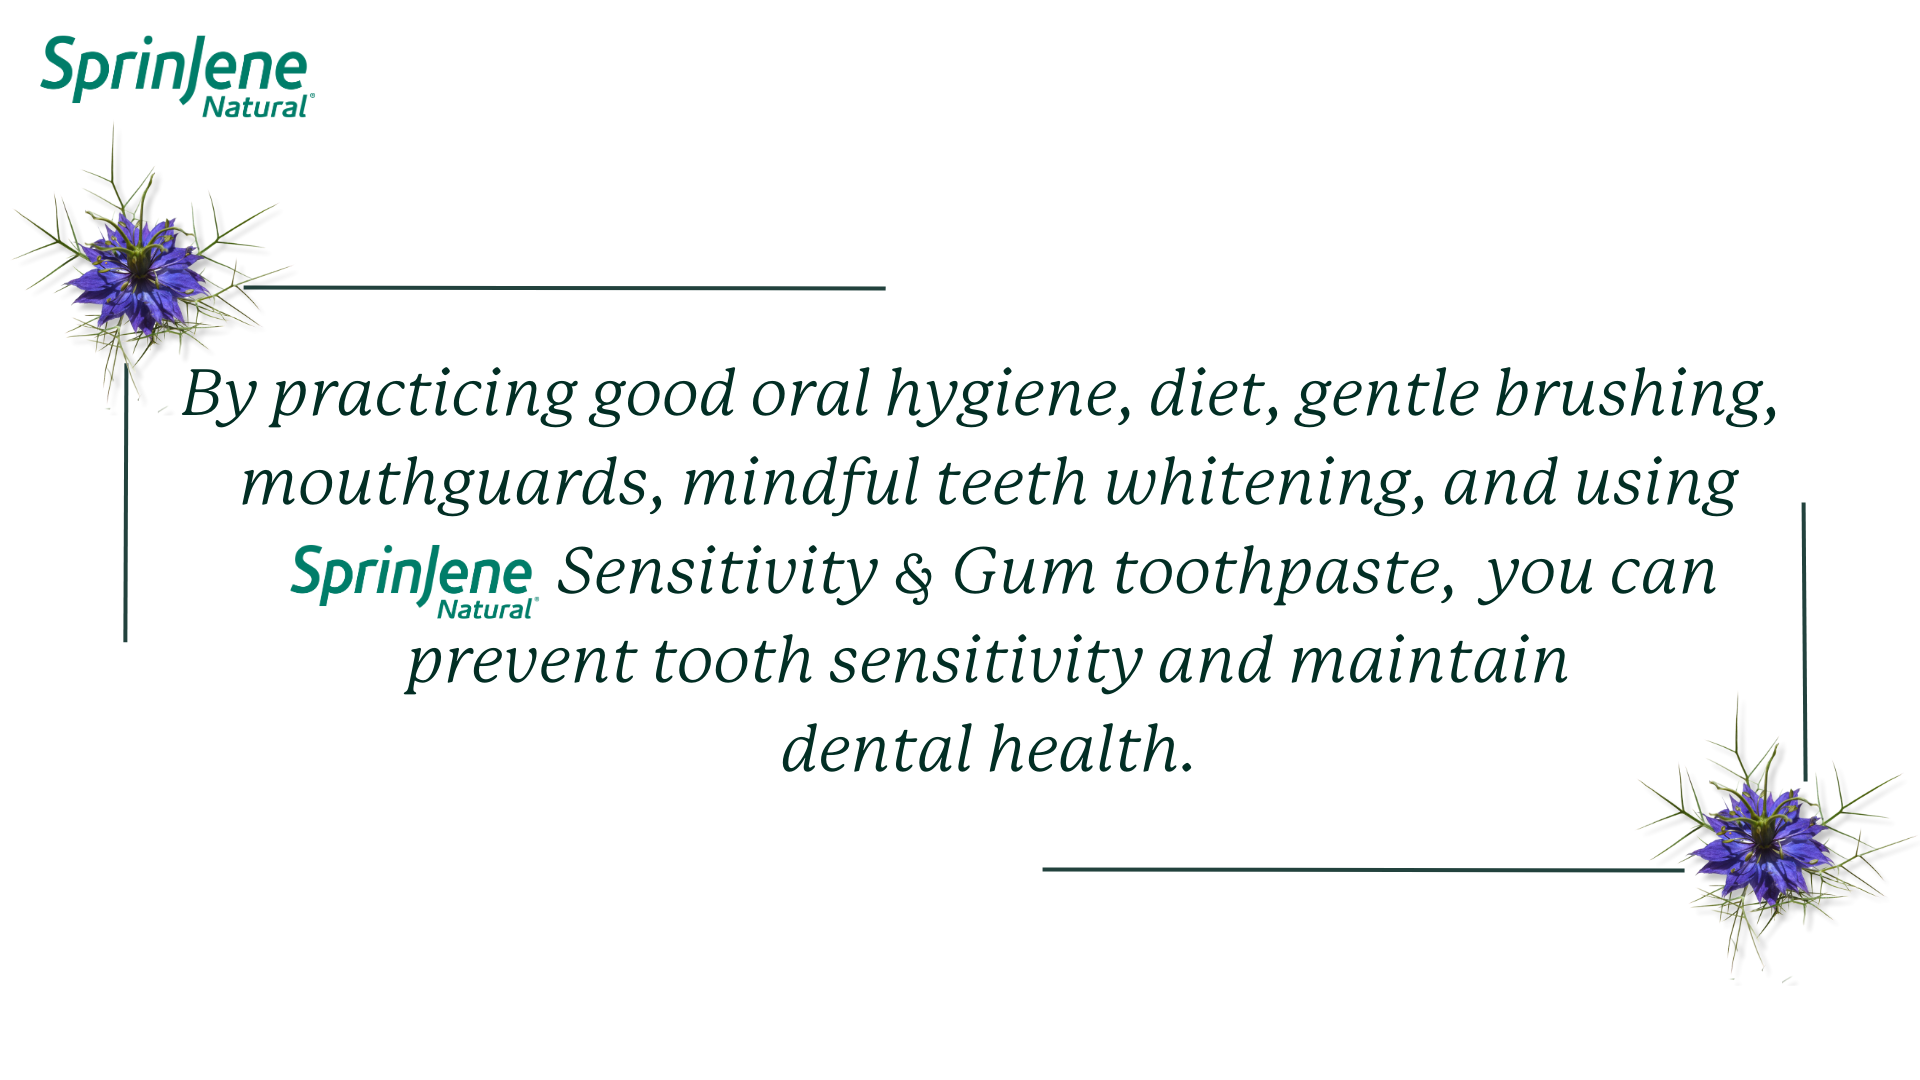 Prevent sensitivity by avoiding overbrushing: Brush gently for two minutes, twice daily, especially after acidic food or drinks to protect your teeth.